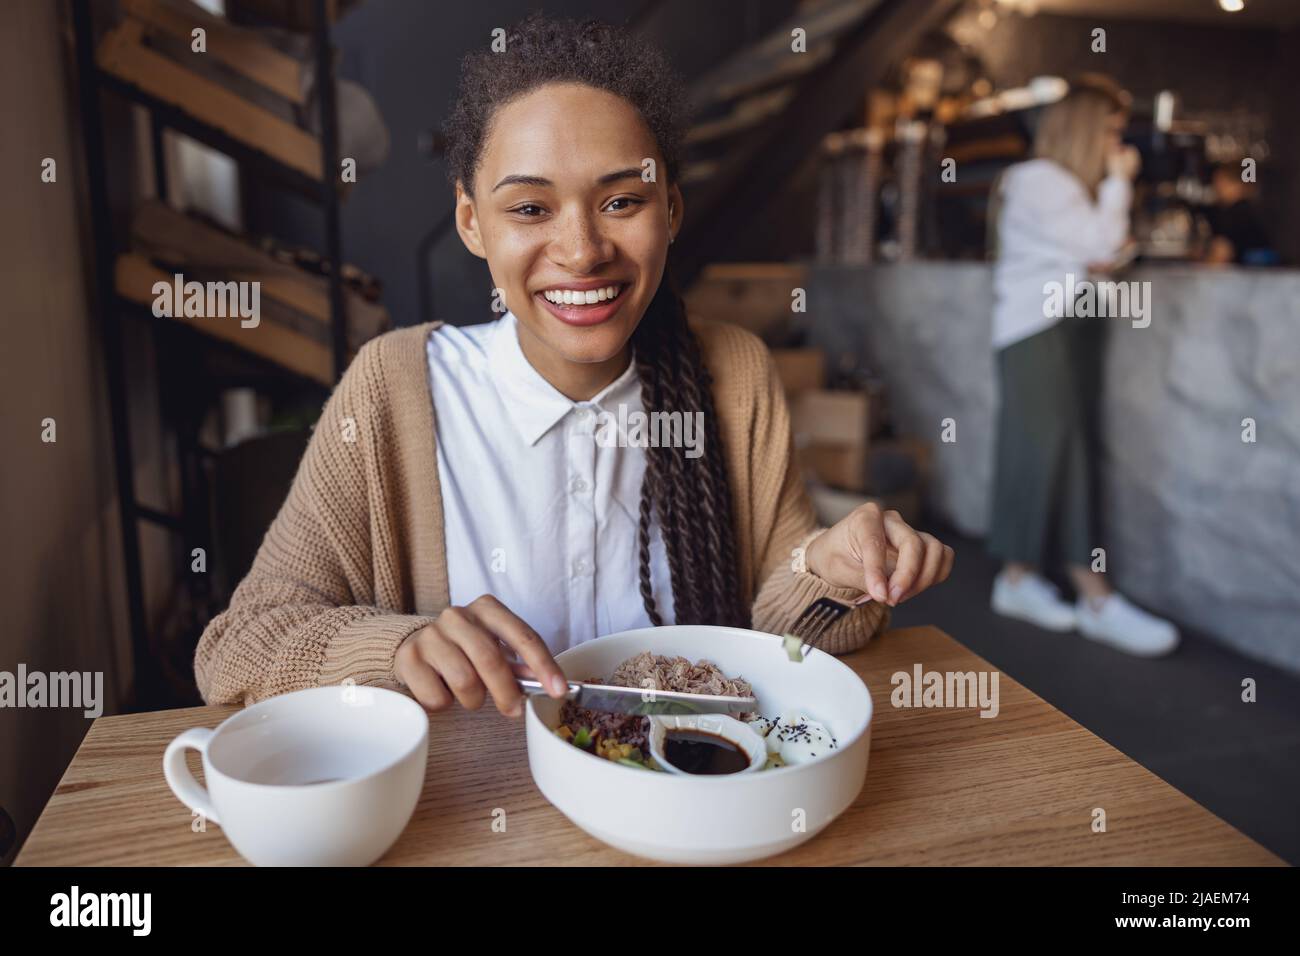 Portrait of cheerful African young woman smiling toothy smile to camera while snacking at a food and drink establishment Stock Photo